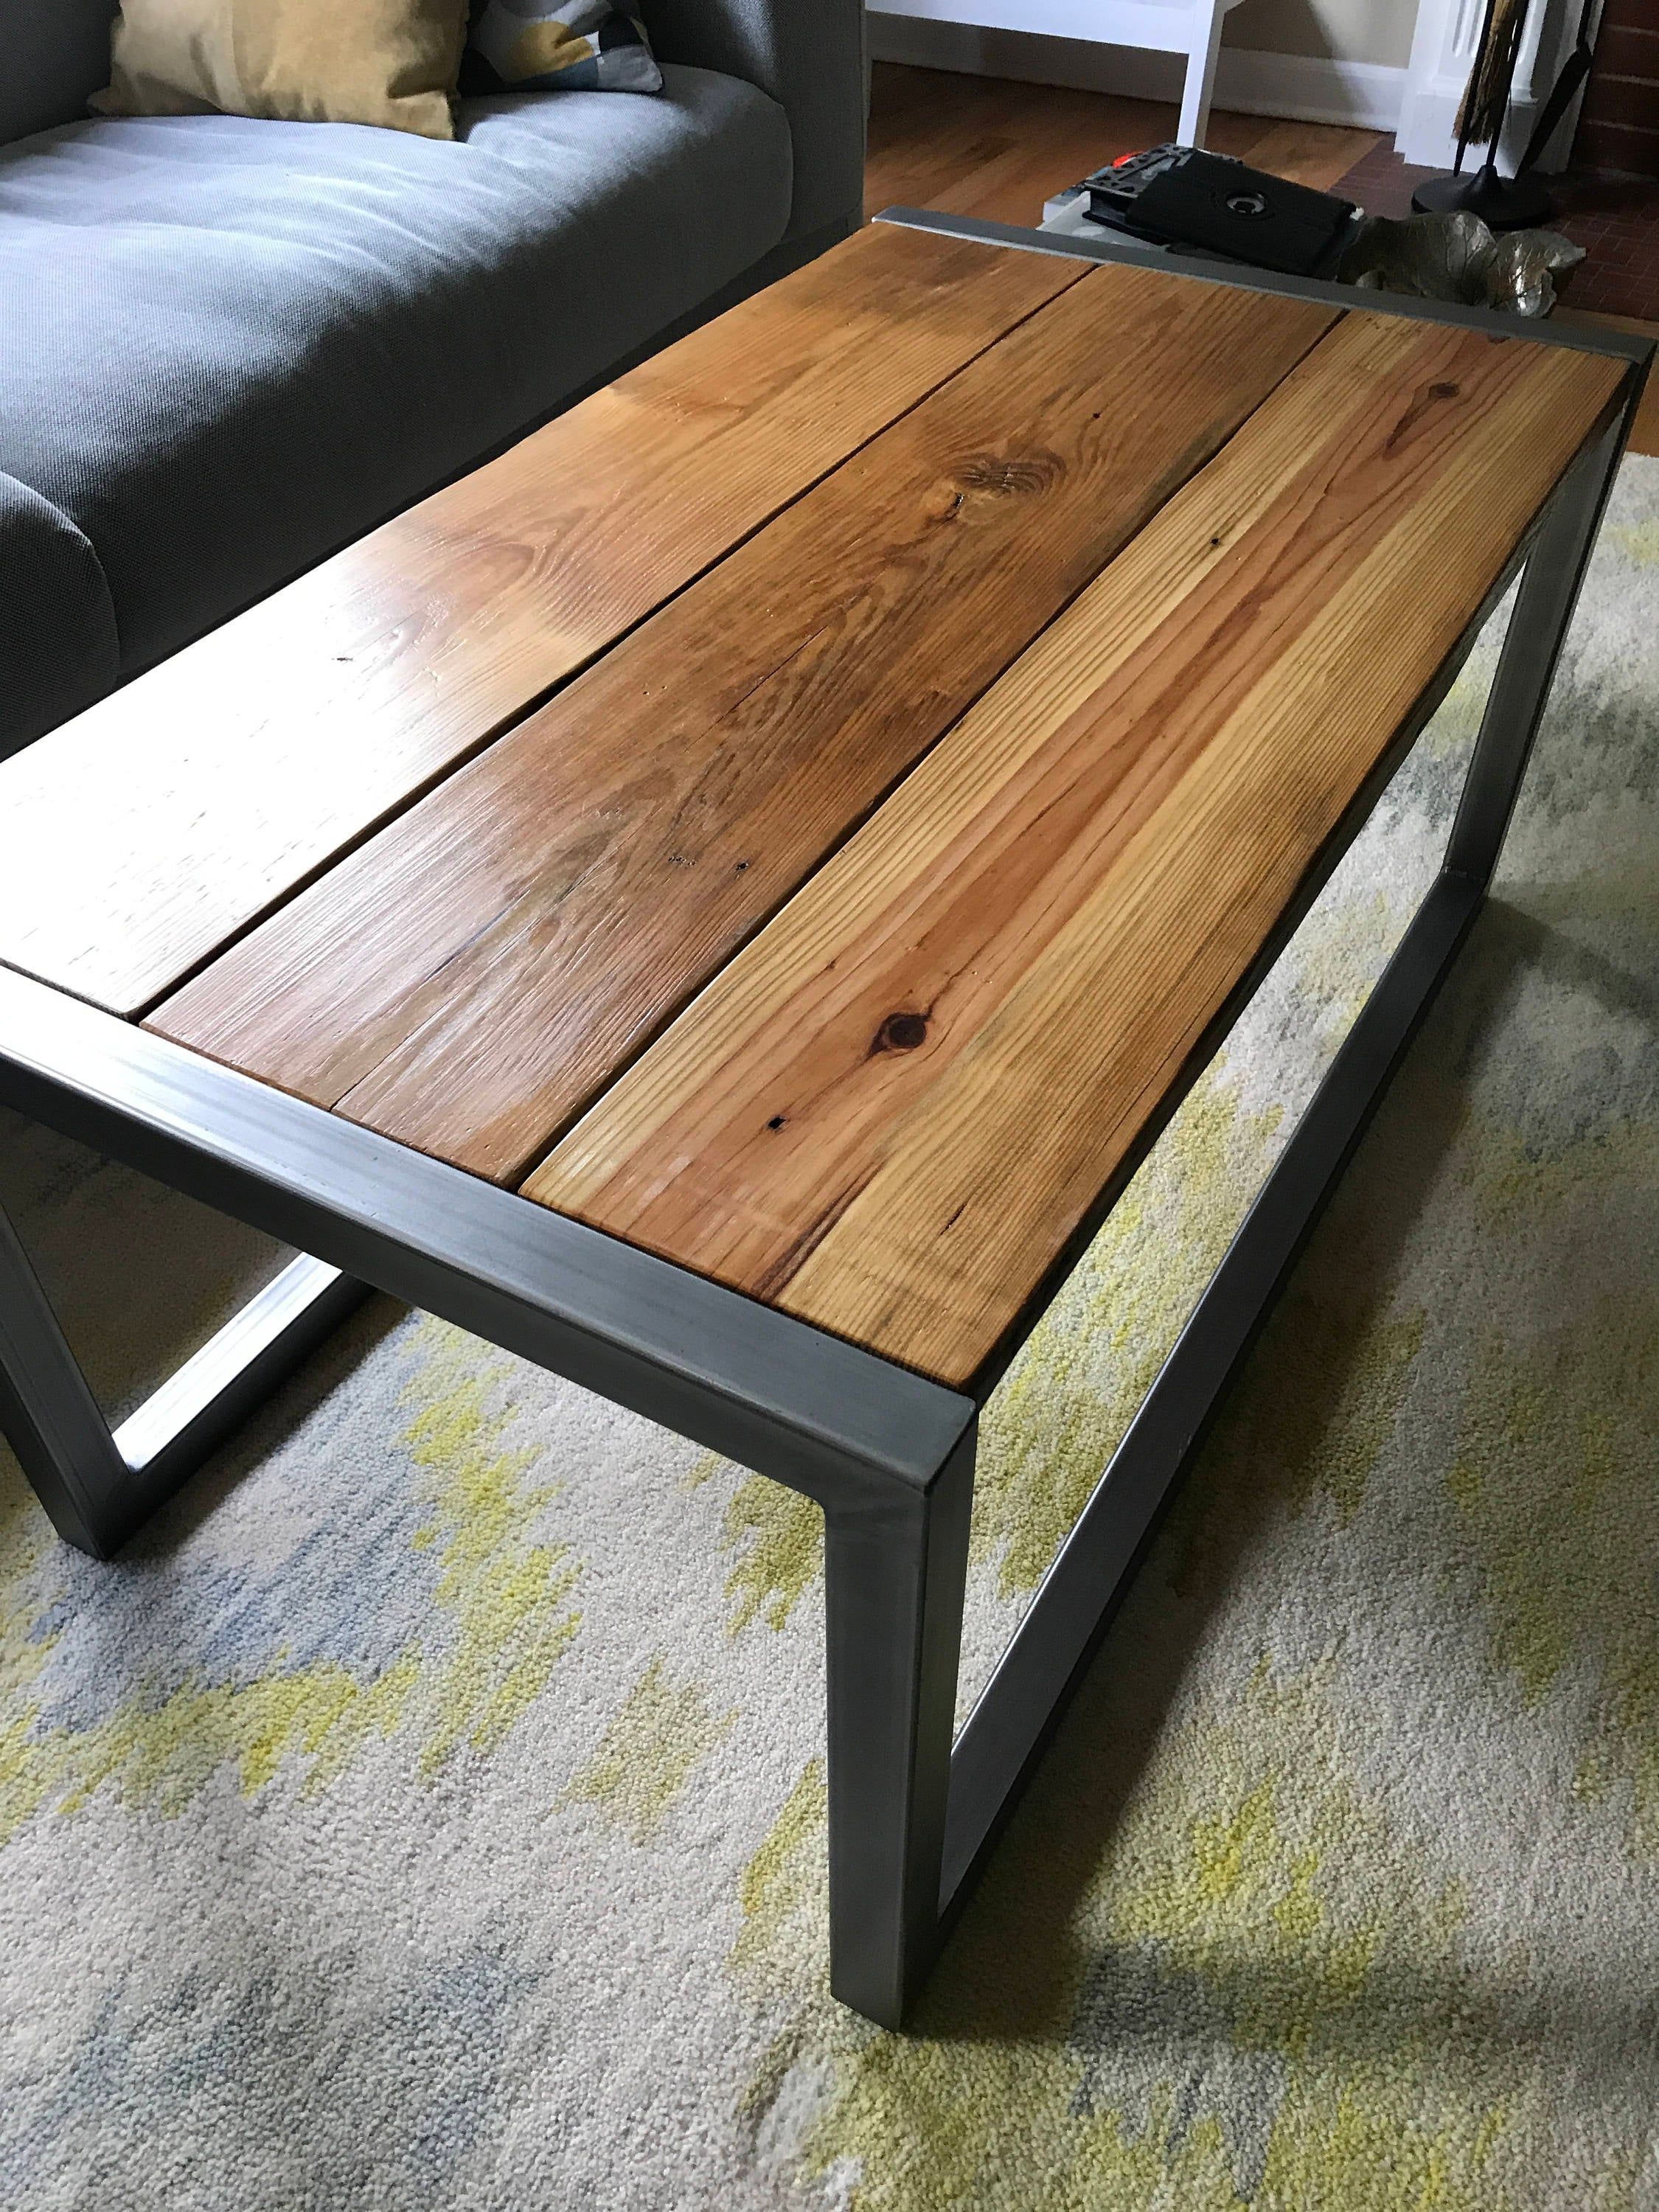 Modern and rustic reclaimed wood coffee table - Modern and rustic reclaimed wood coffee table -   16 diy Table wood ideas